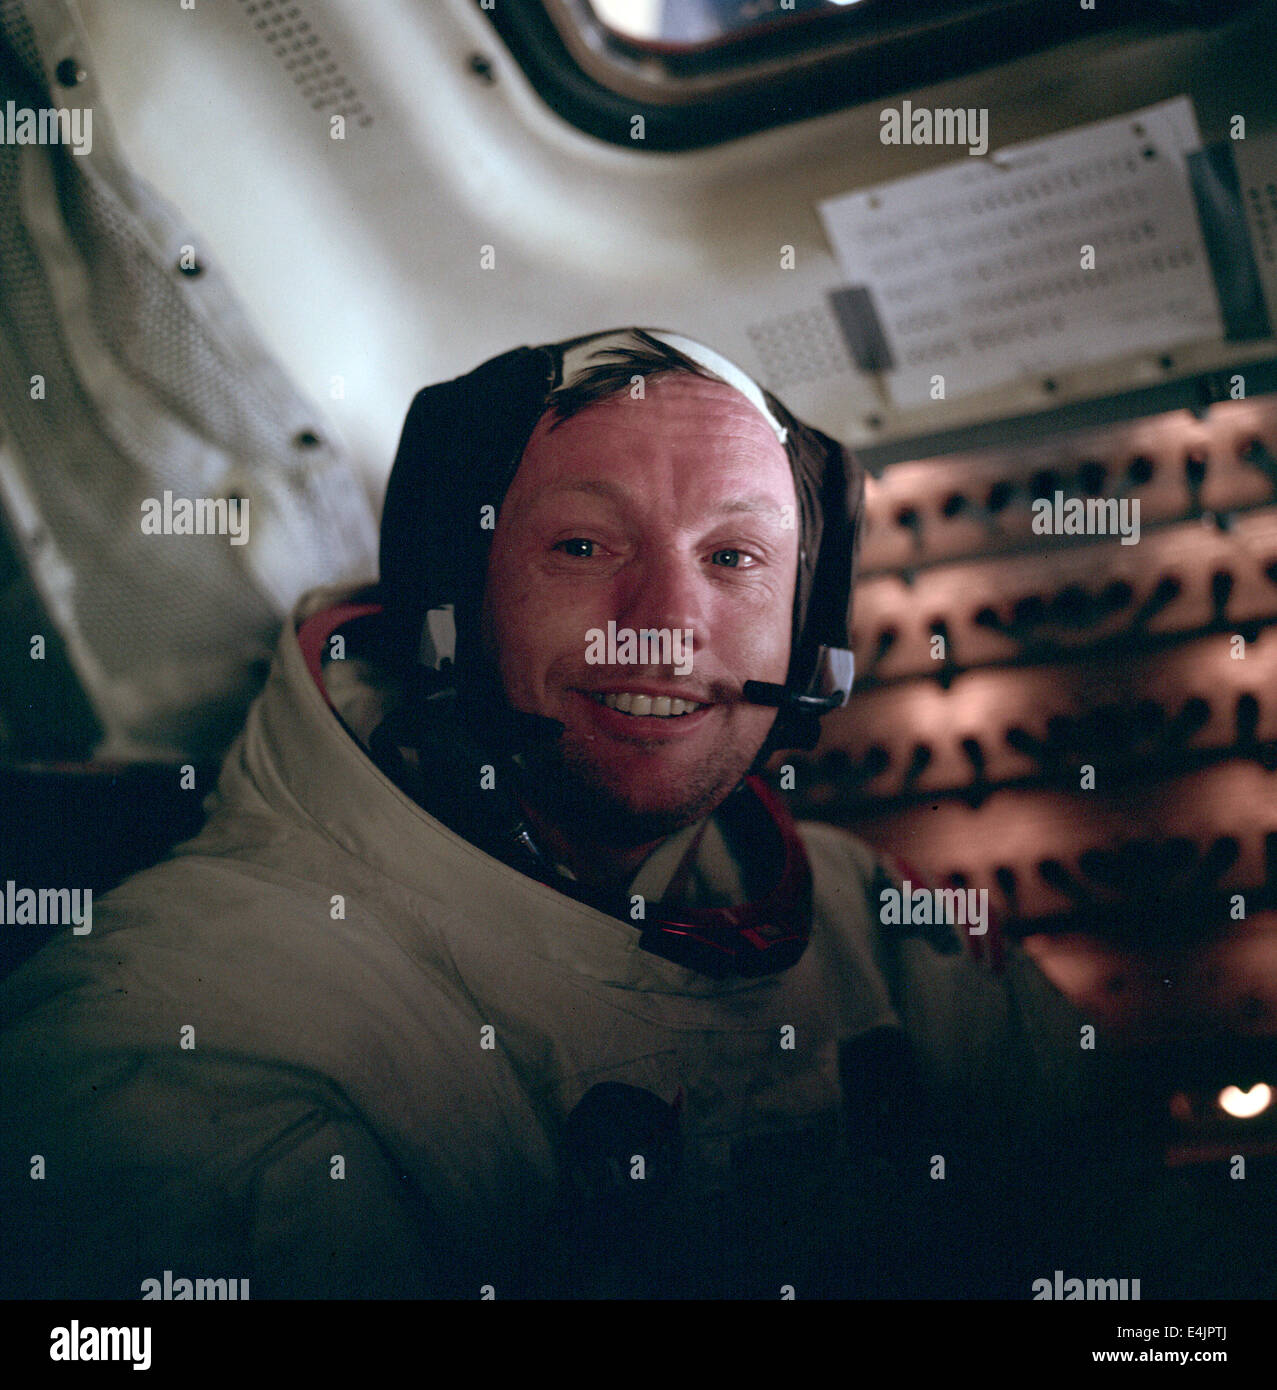 Neil Armstrong in Lunar Module after his historic moonwalk Stock Photo